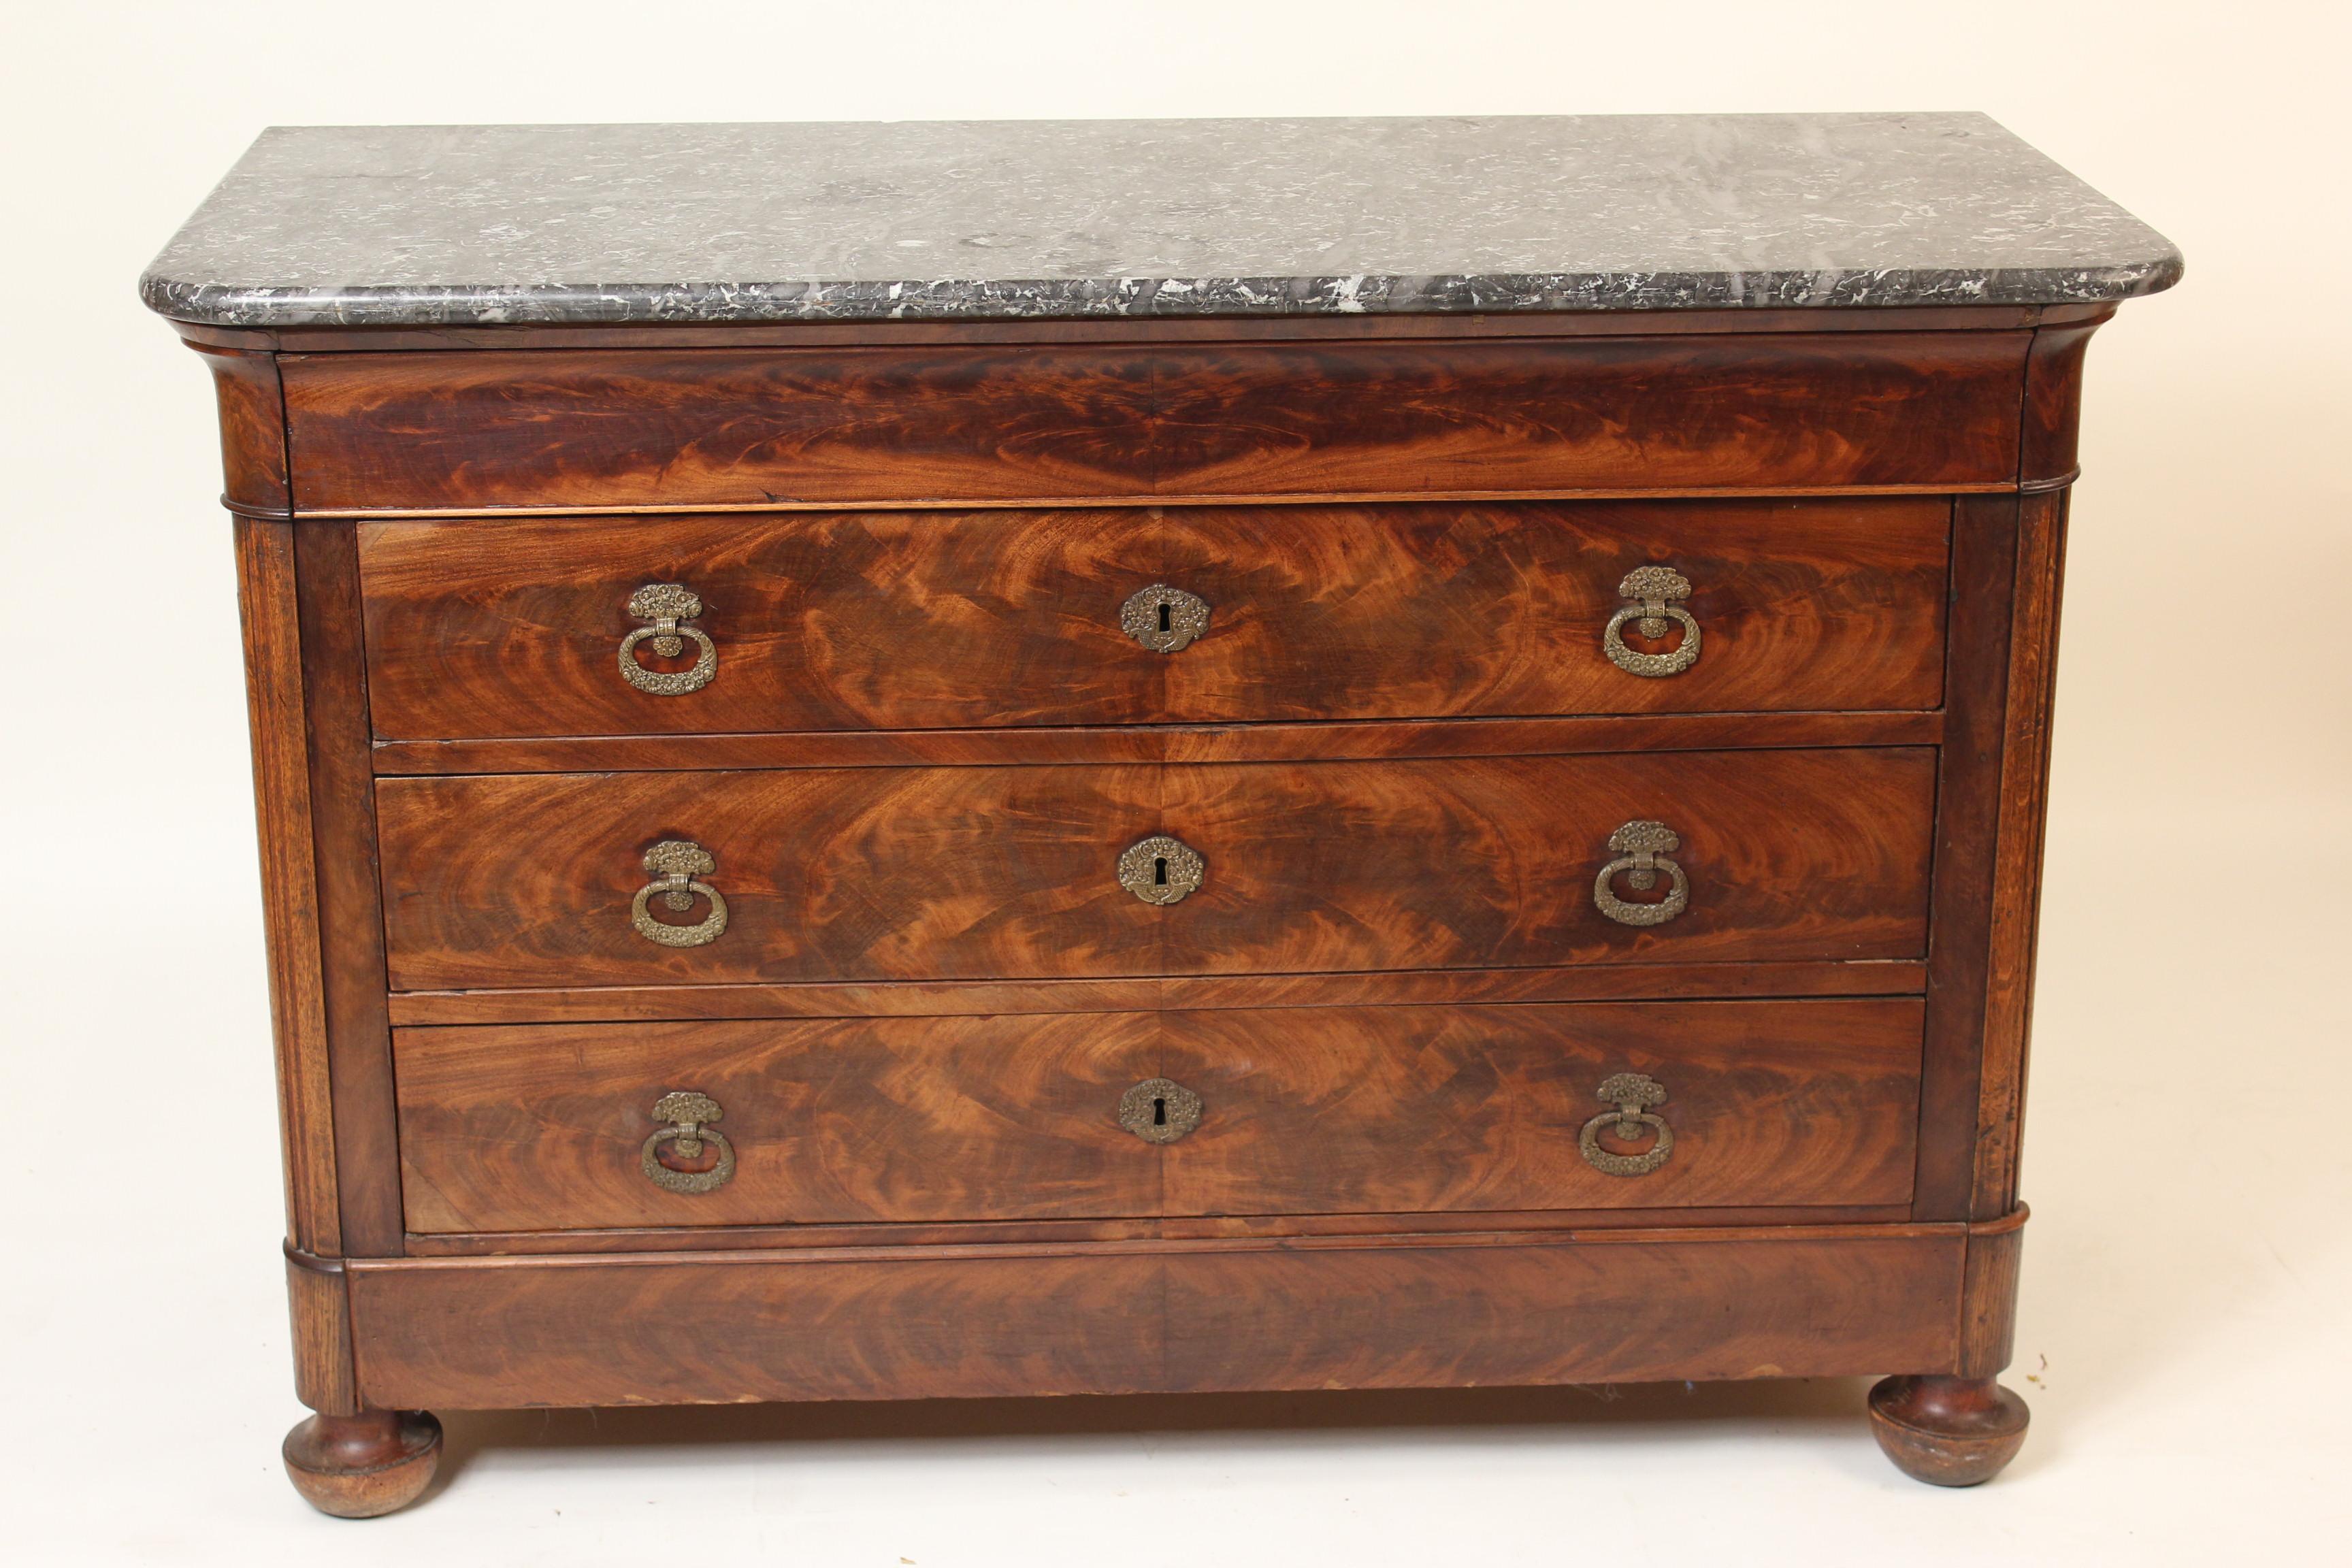 Charles X flame mahogany and oak chest of drawers with bronze drawer pulls, bronze escutcheons and a marble top, circa 1835. This chest has very nicely figured mahogany used on the front, the sides are oak.